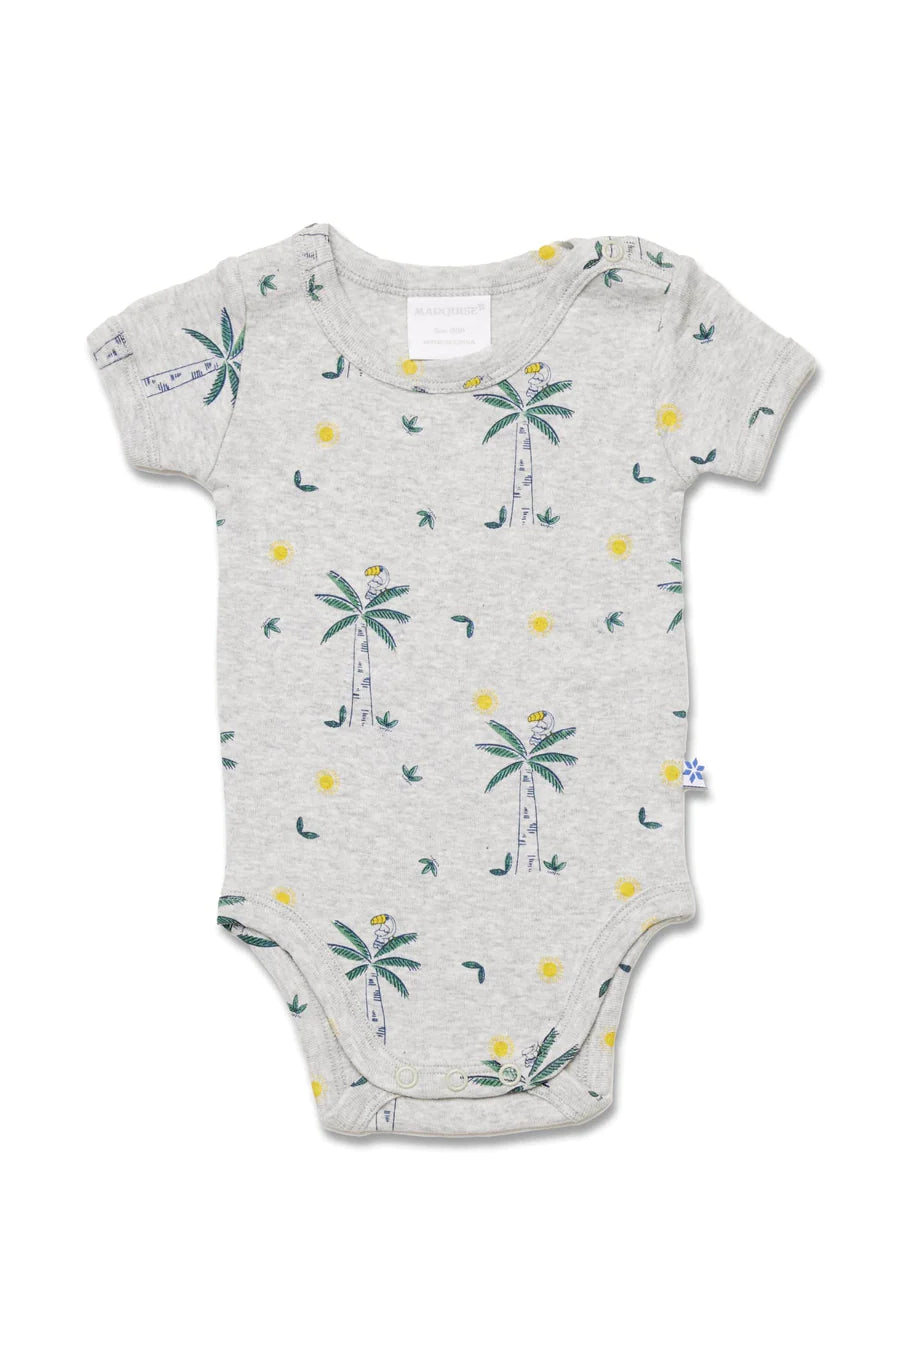 Marquise Palm Tree Bodysuit 2 Pack - White/Grey